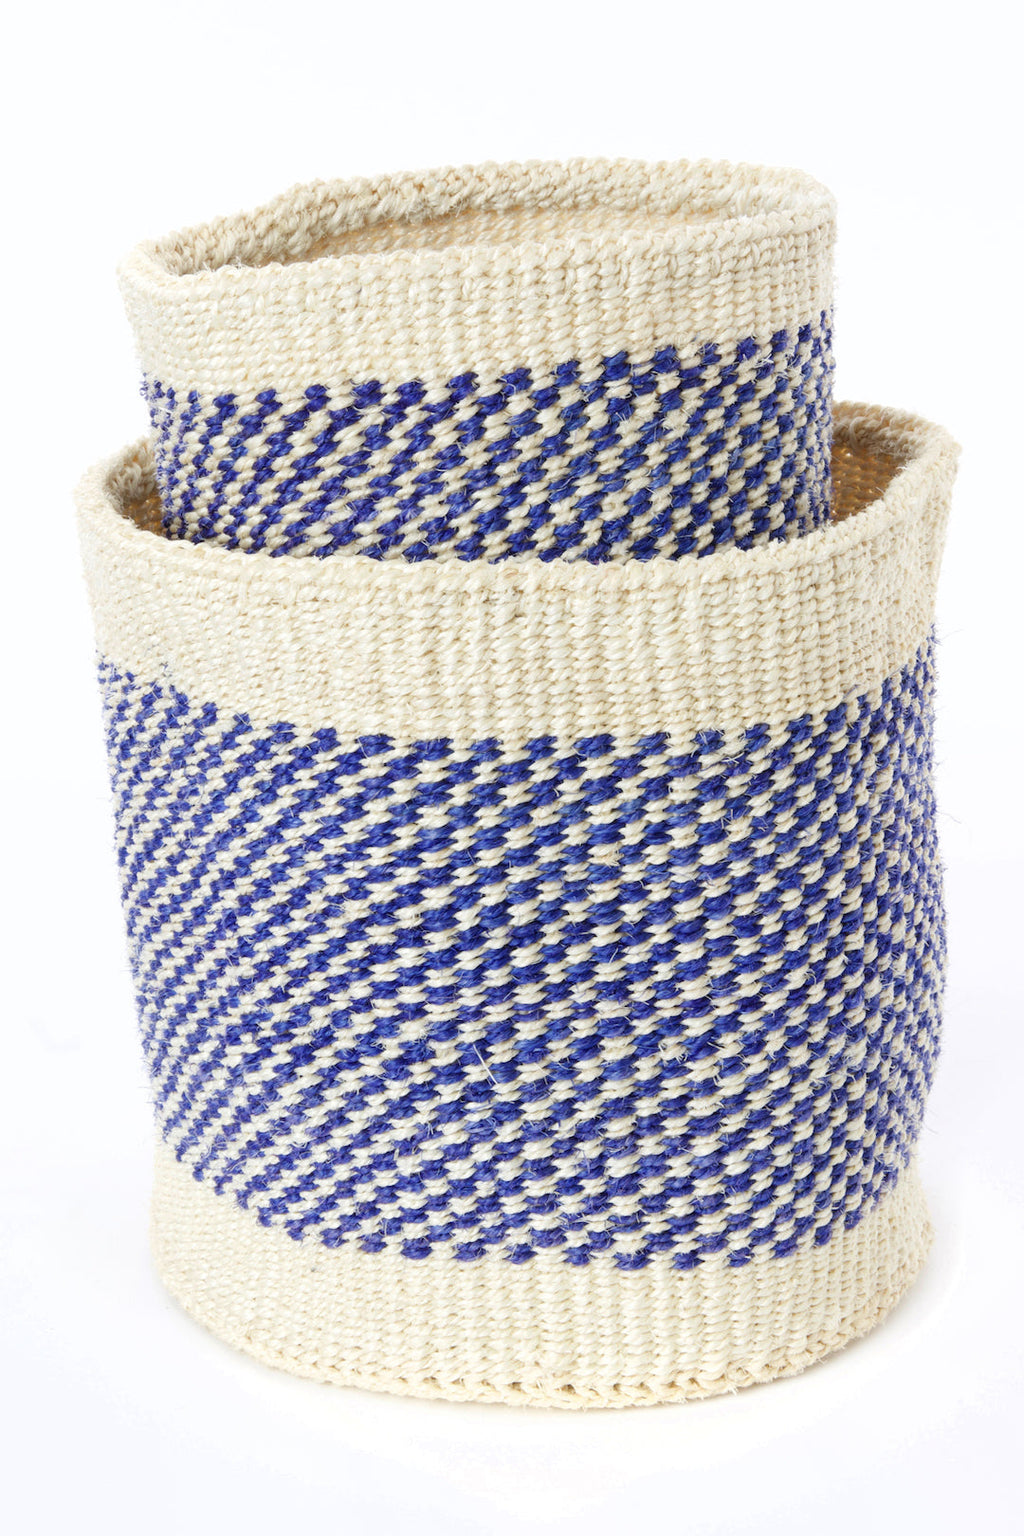 Set of Two Blue and Cream Twill Sisal Nesting Baskets, Image